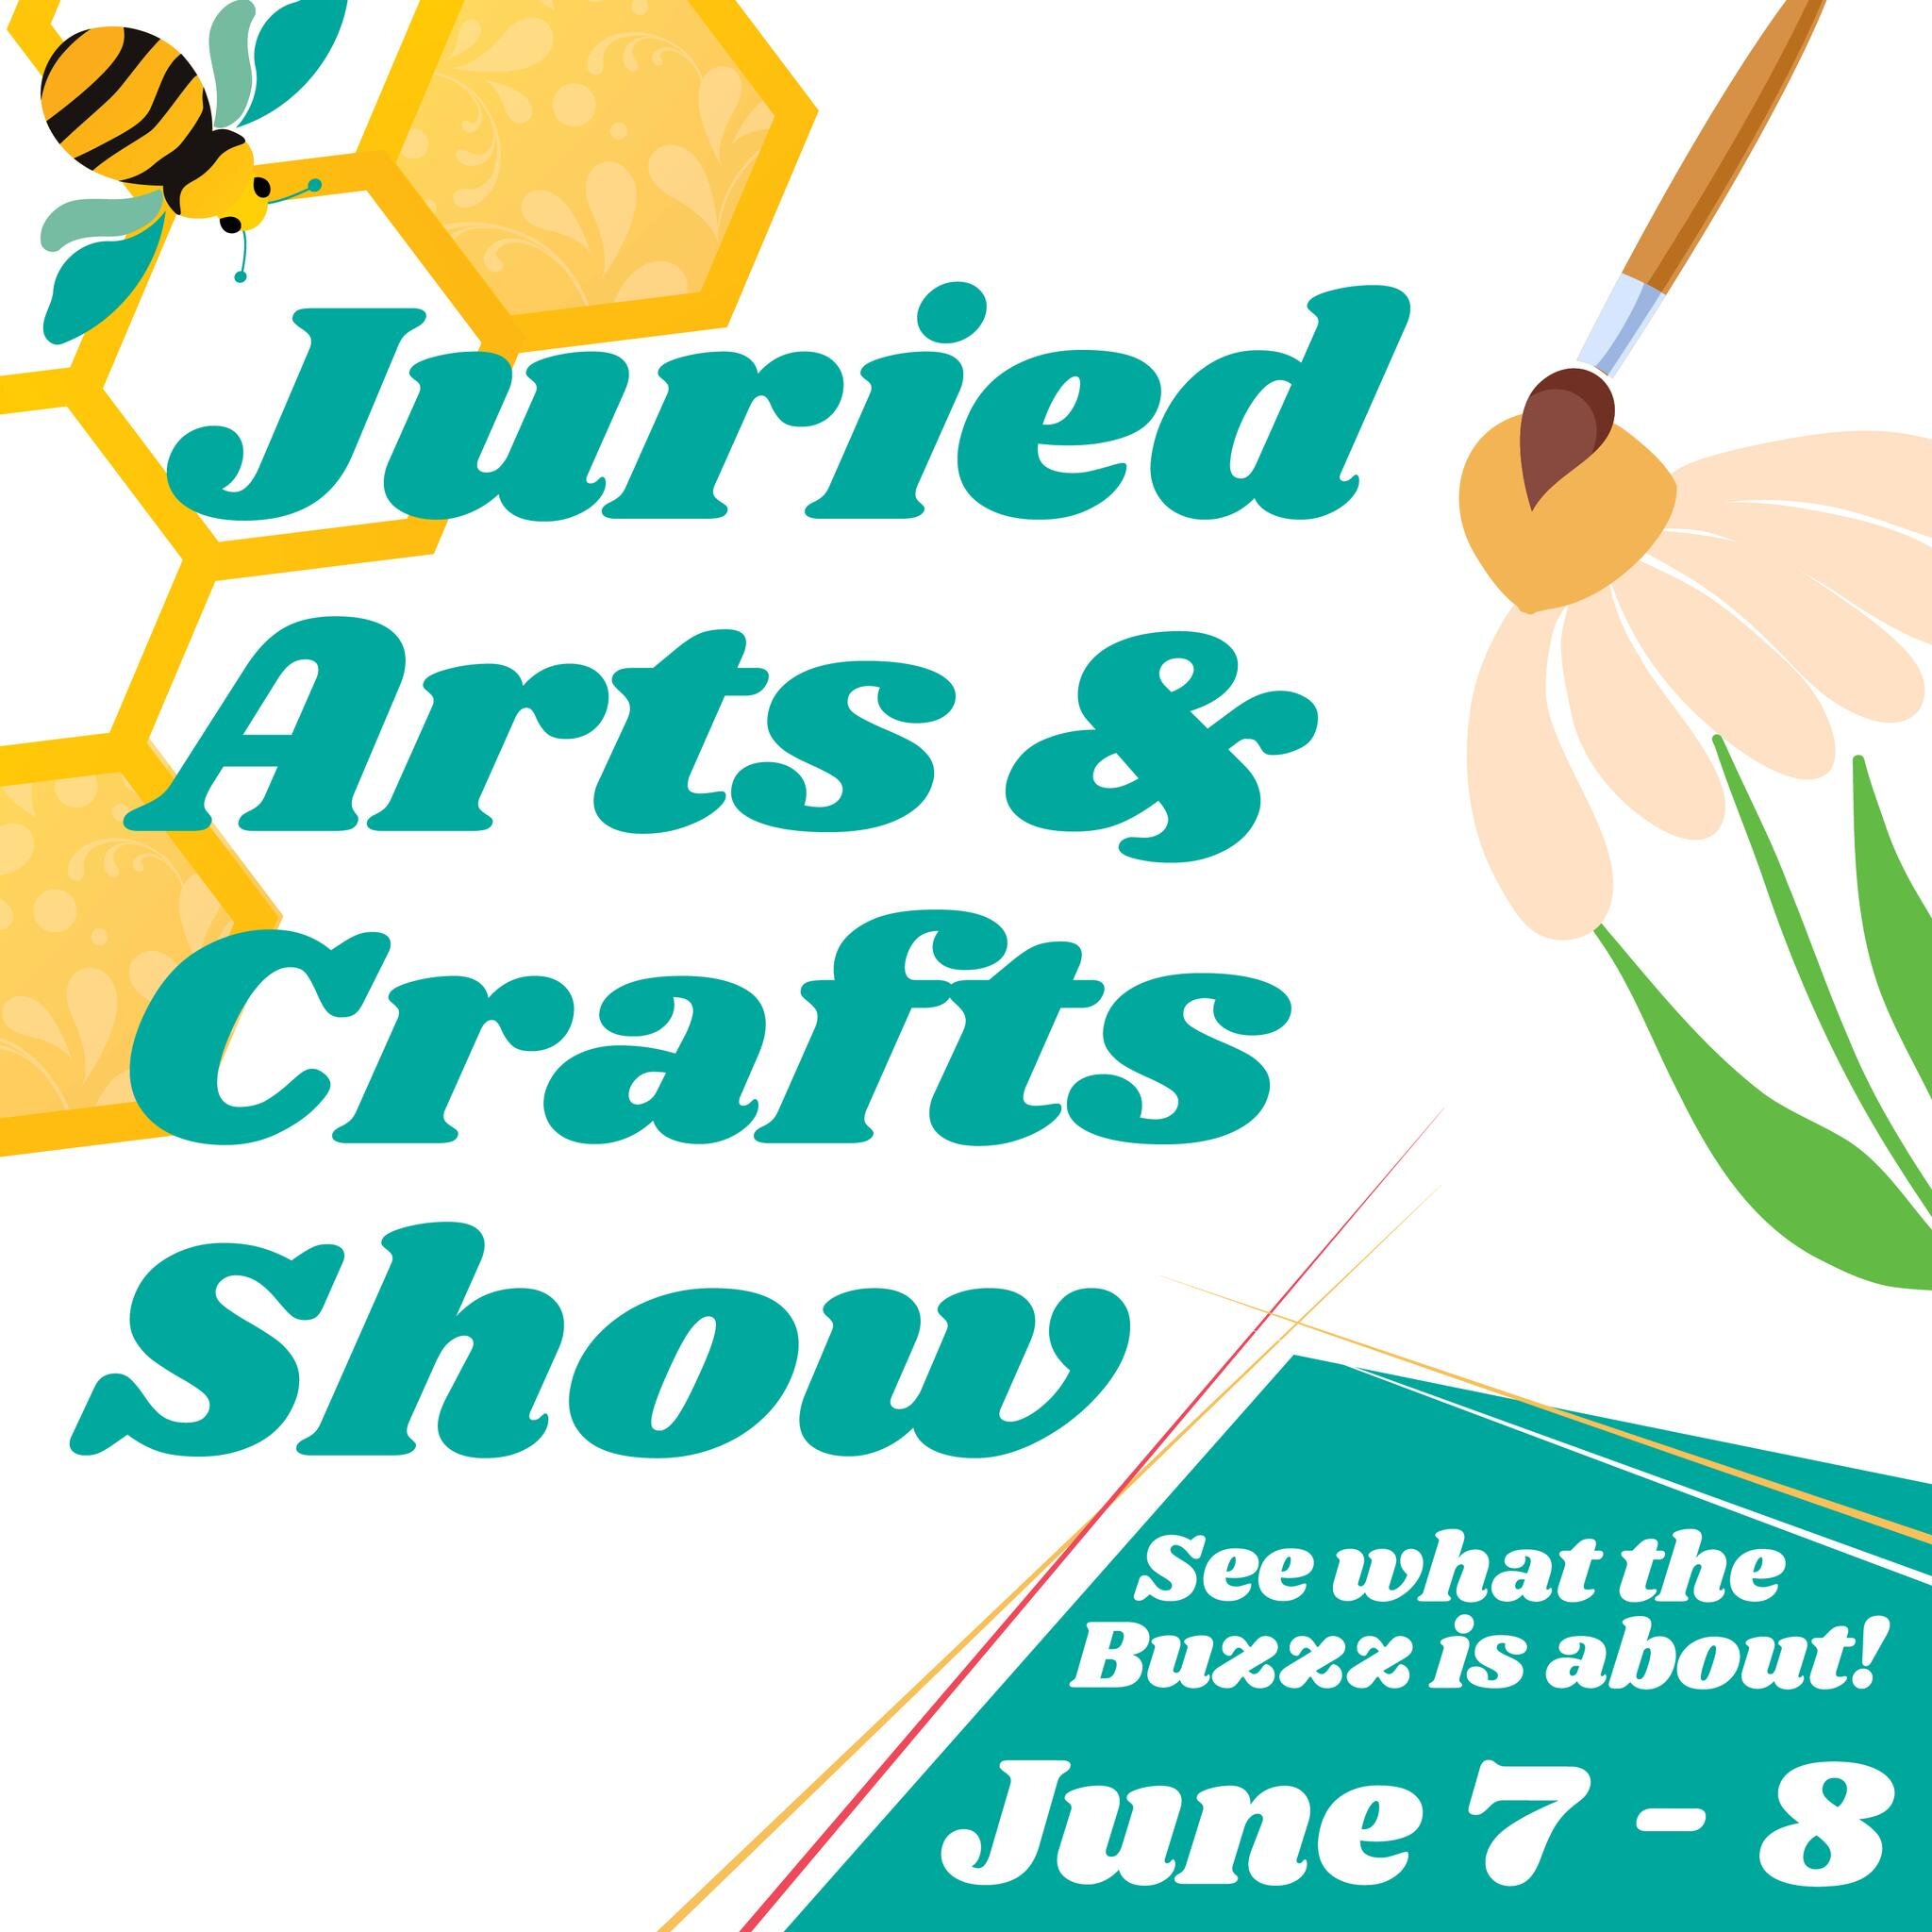 We've all been waiting for it... The Juried Arts &amp; Crafts Show vendor application is now available! Check out our new location (indoors = air conditioning 🤩) and make plans to join us.

Will you bee there?
https://scfestivalofflowers.org/schedul